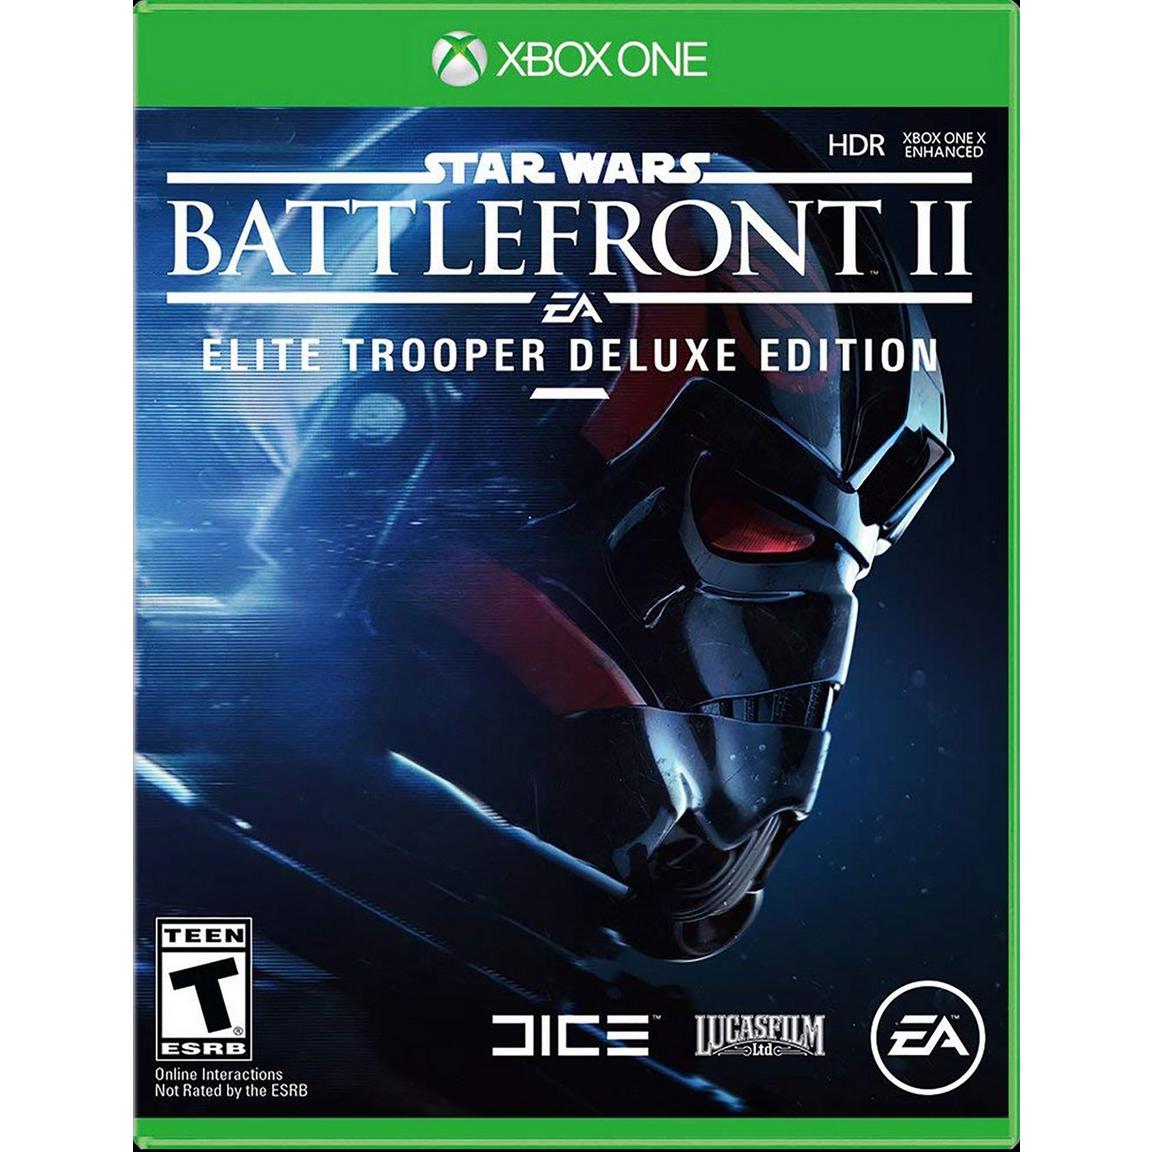 Star Wars Battlefront II Deluxe Edition Upgrade - Xbox One, Digital -  Electronic Arts, 7D4-00210